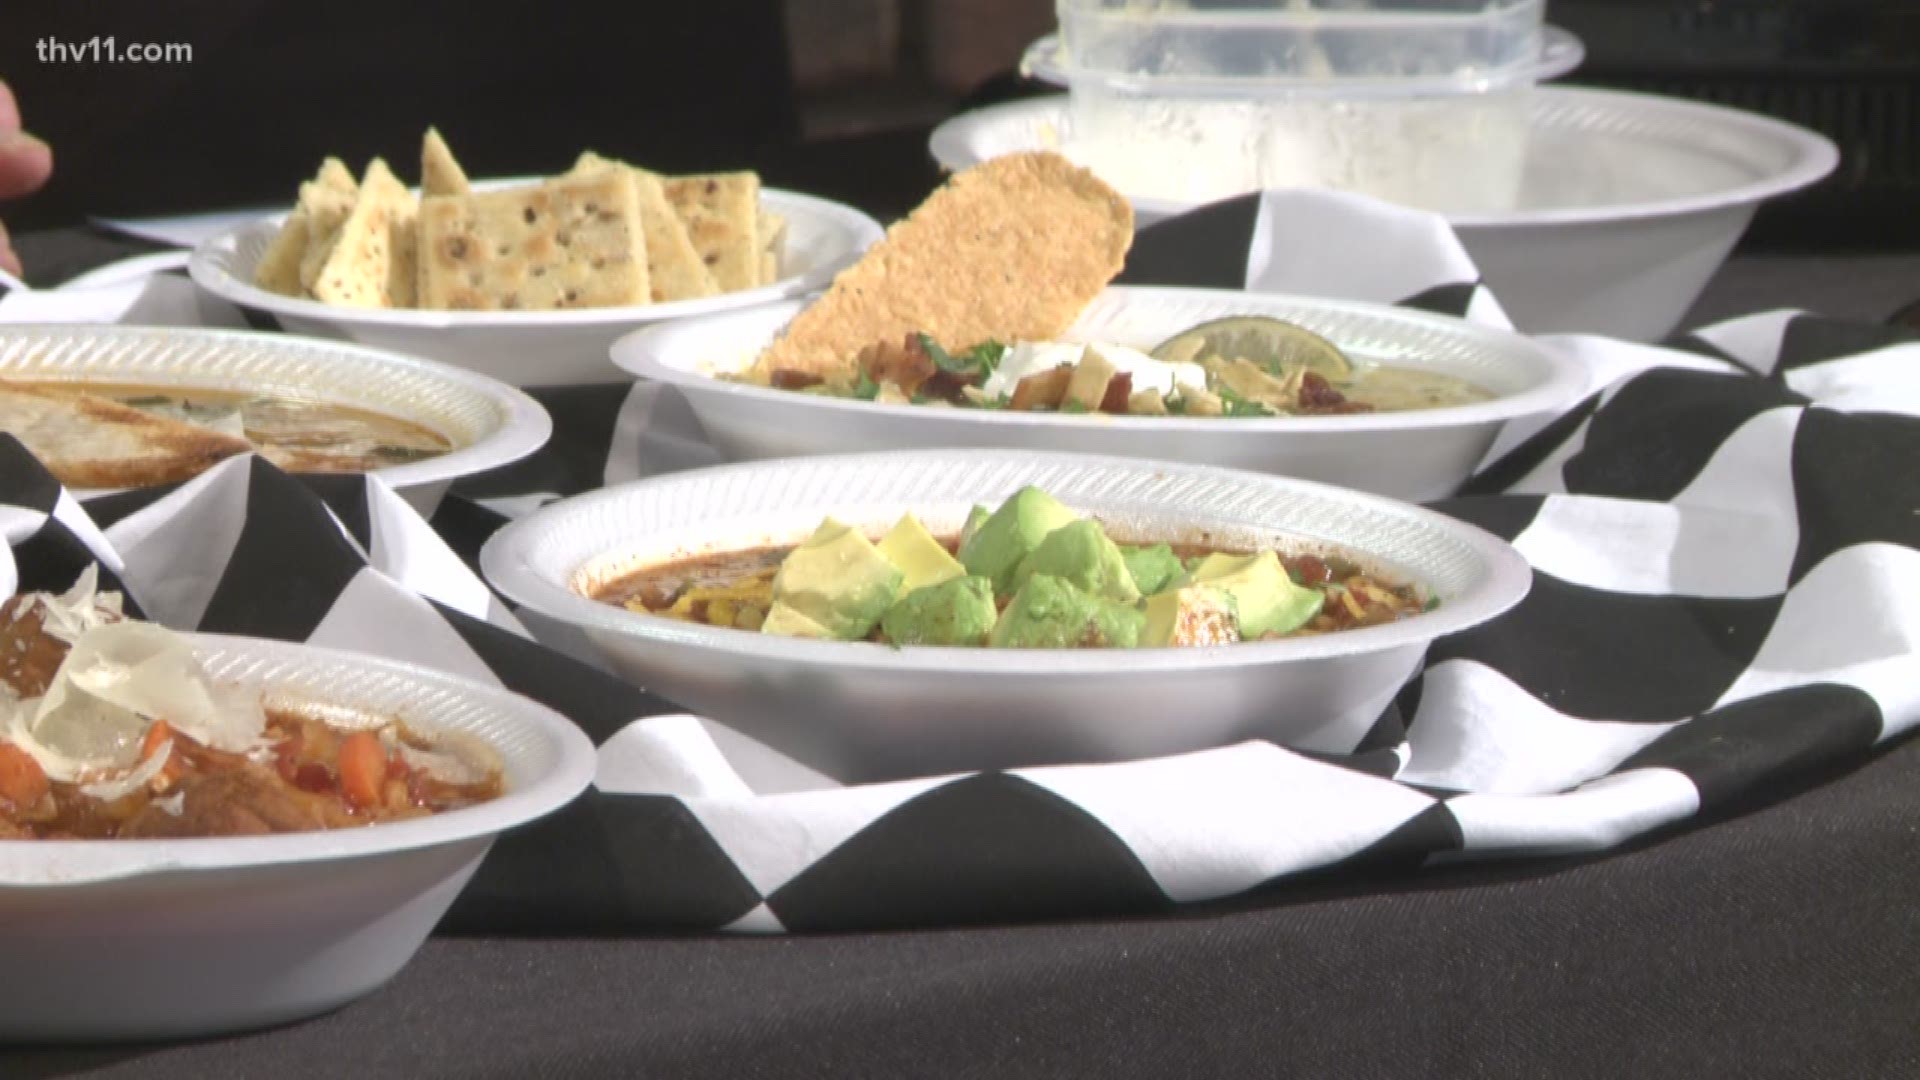 Debbie Arnold joined THV11 This Morning to make us some famous Barleycorn's Cheese Soup.